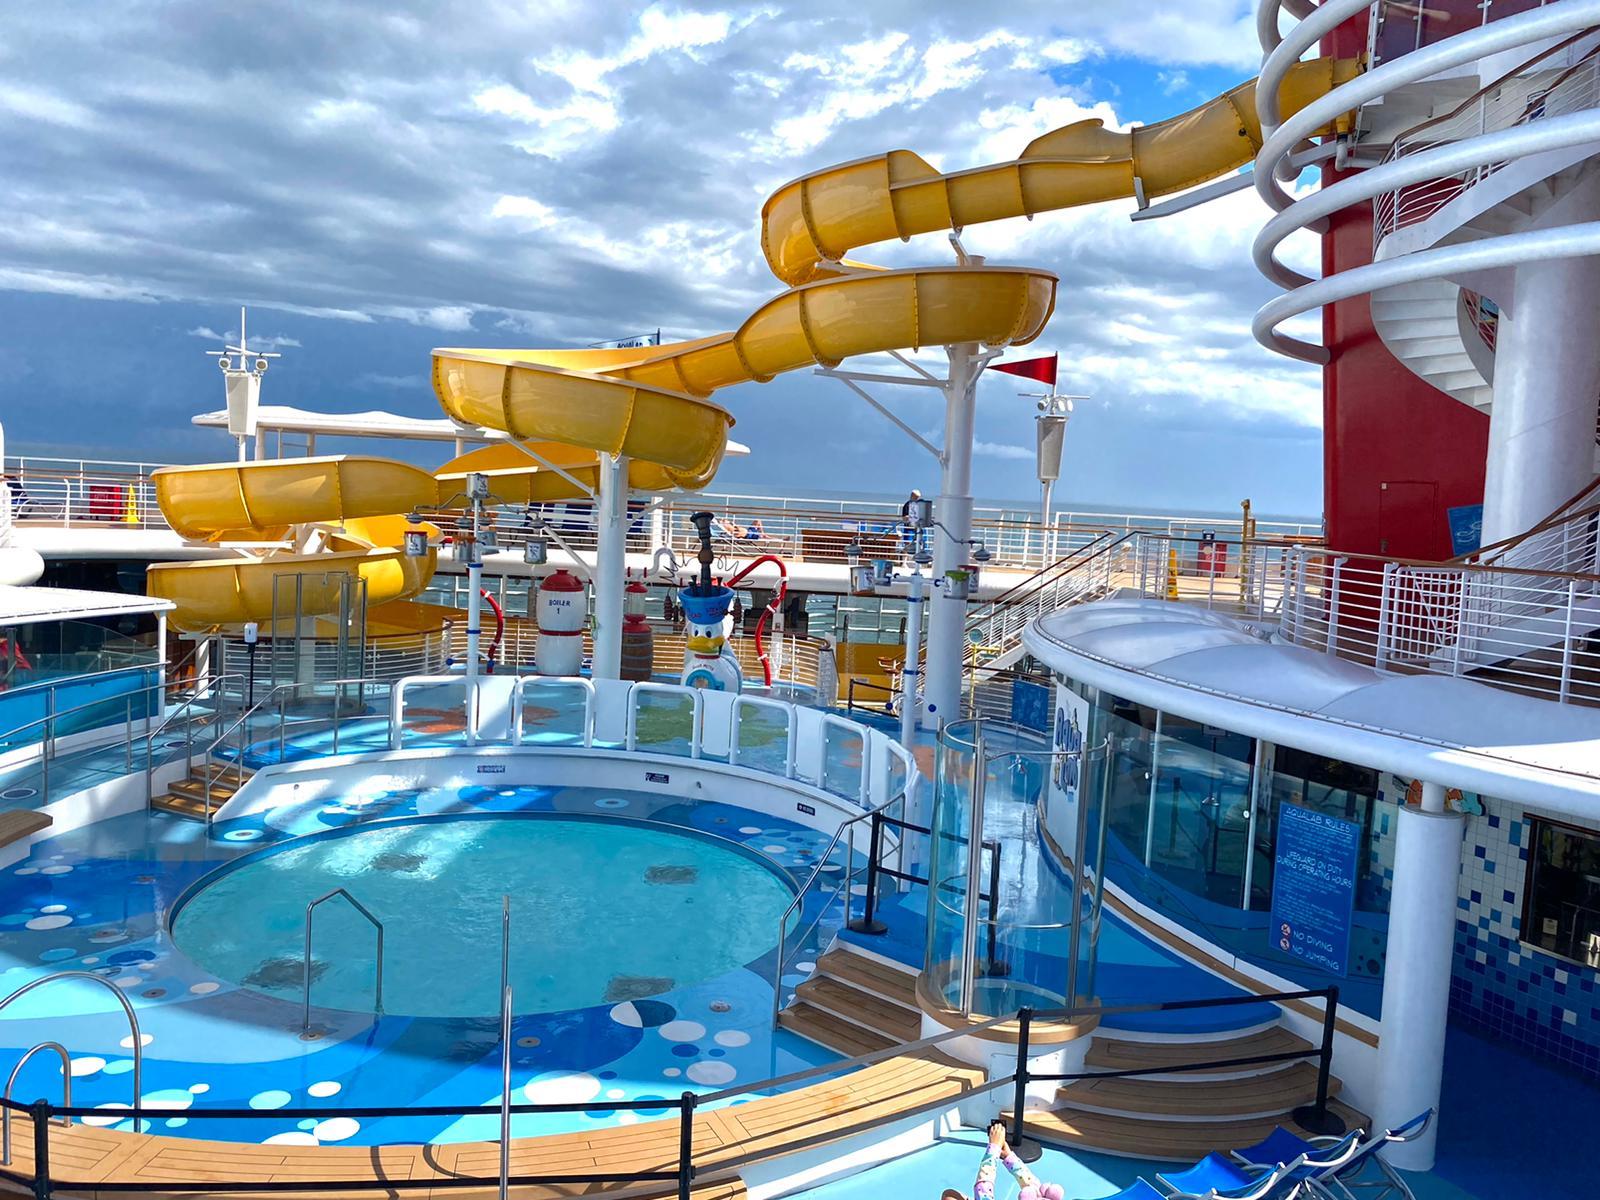 One of pools on the Disney cruise